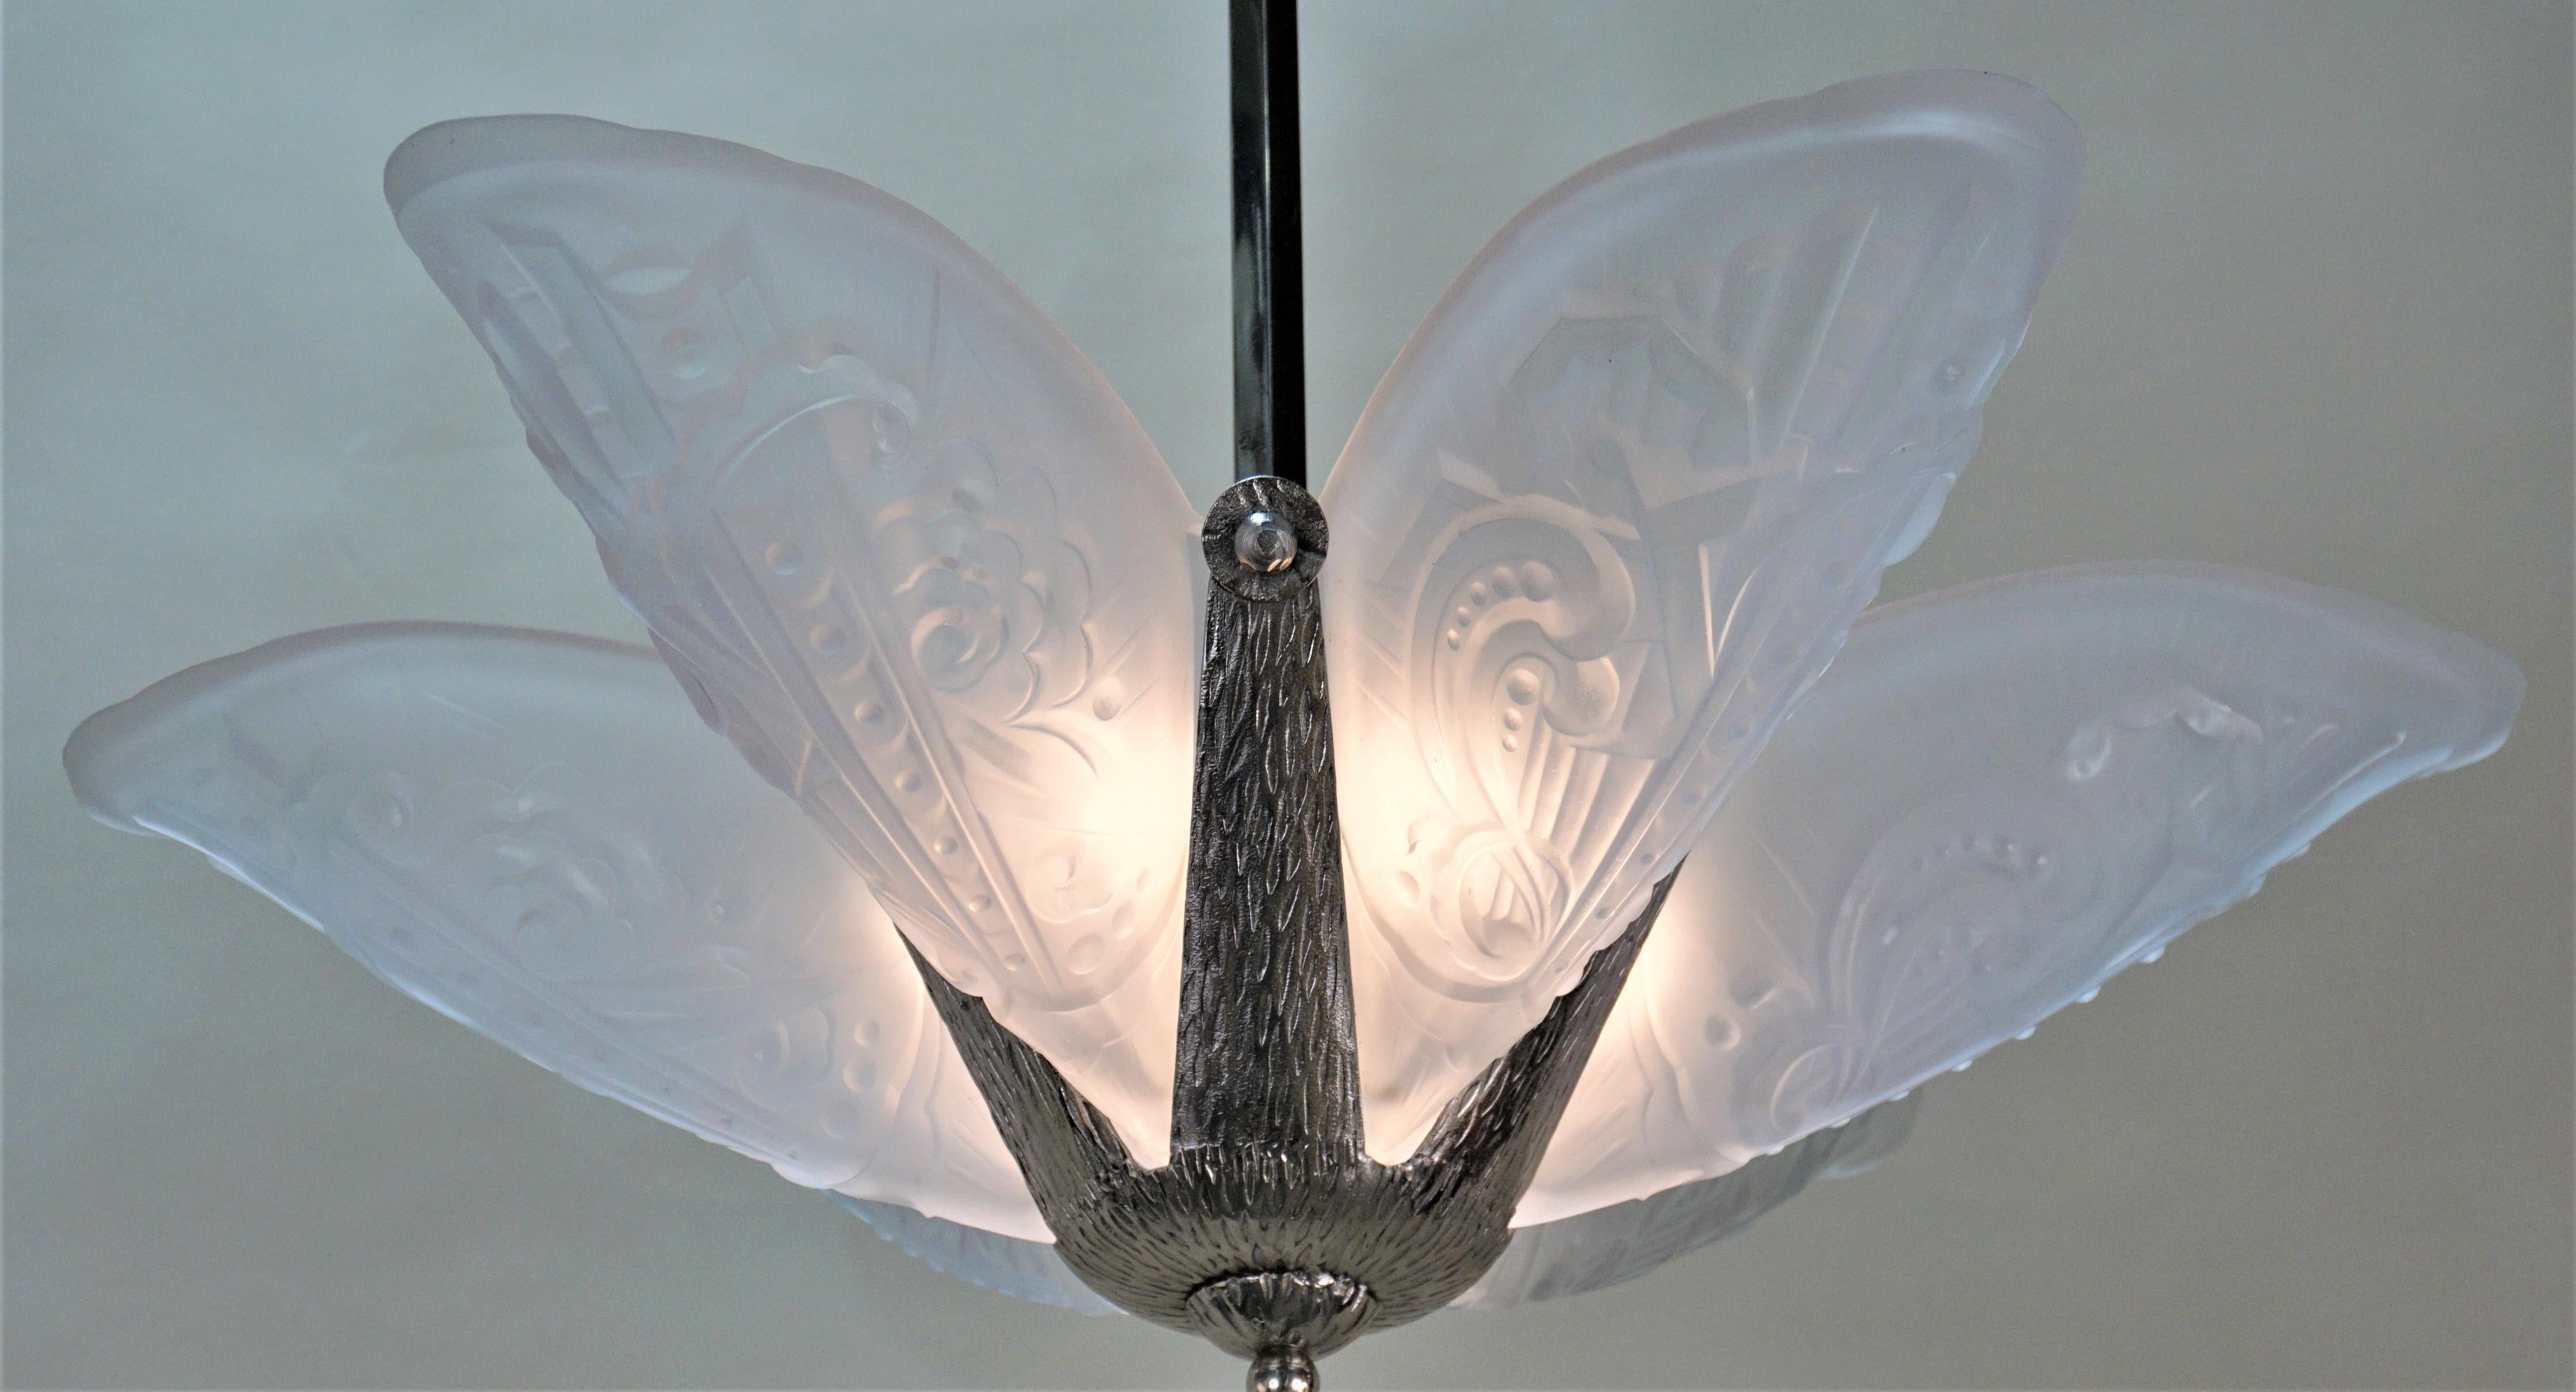 French 1930s six clear Frost glass shade with nickel plated frame Art Deco chandelier.
The height is 22.5